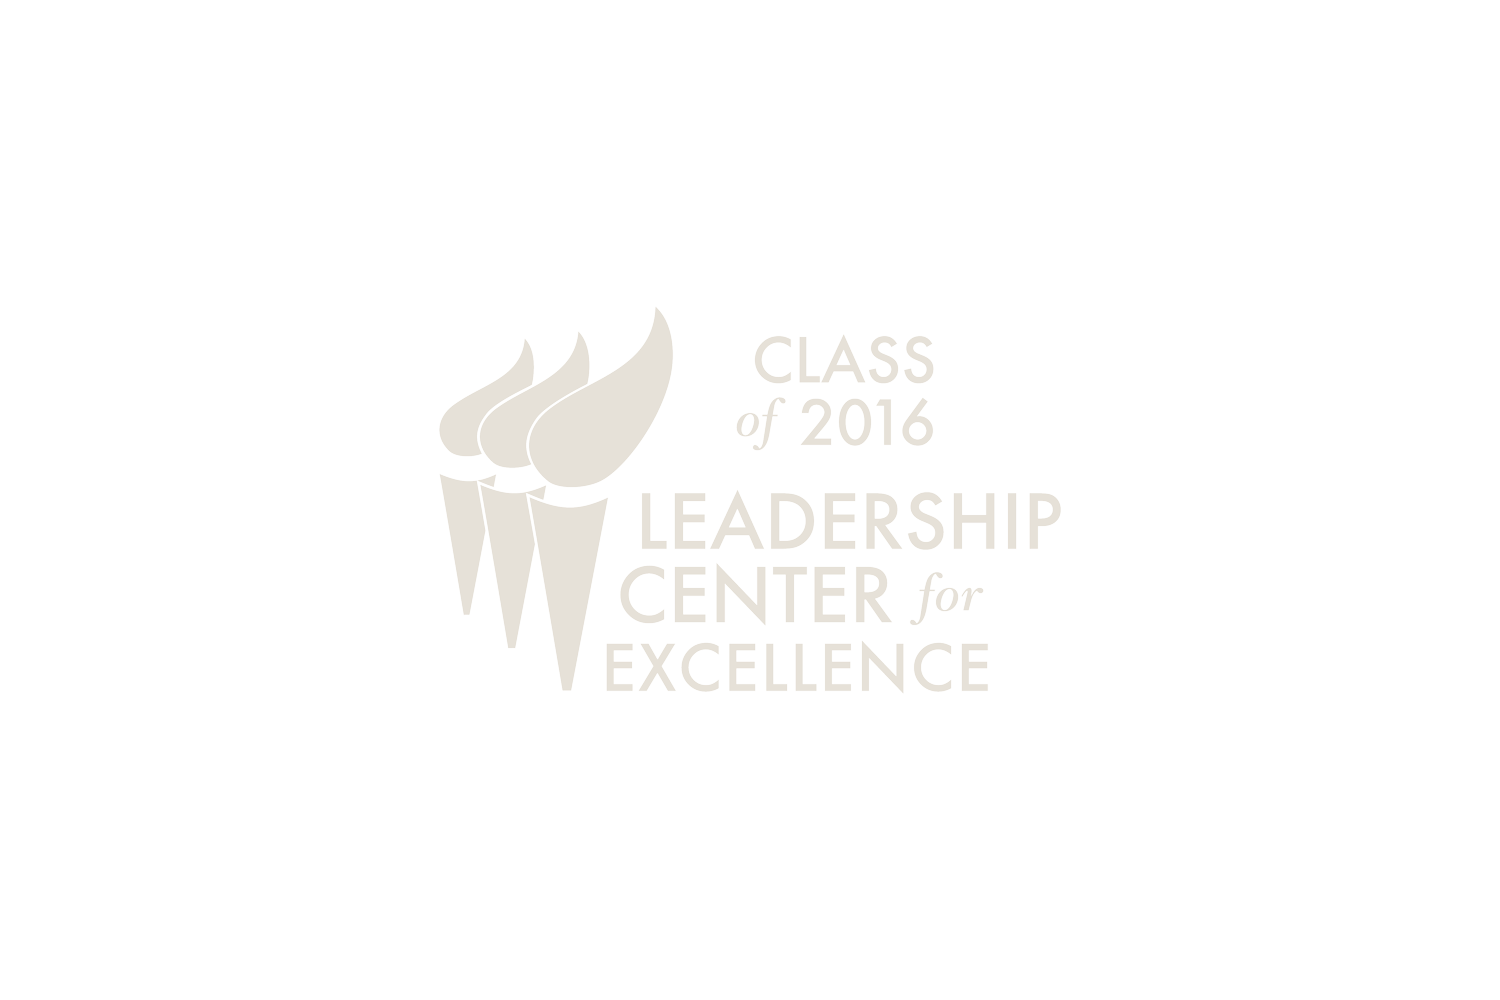 leadership-center-for-excellence-2016-标志.png